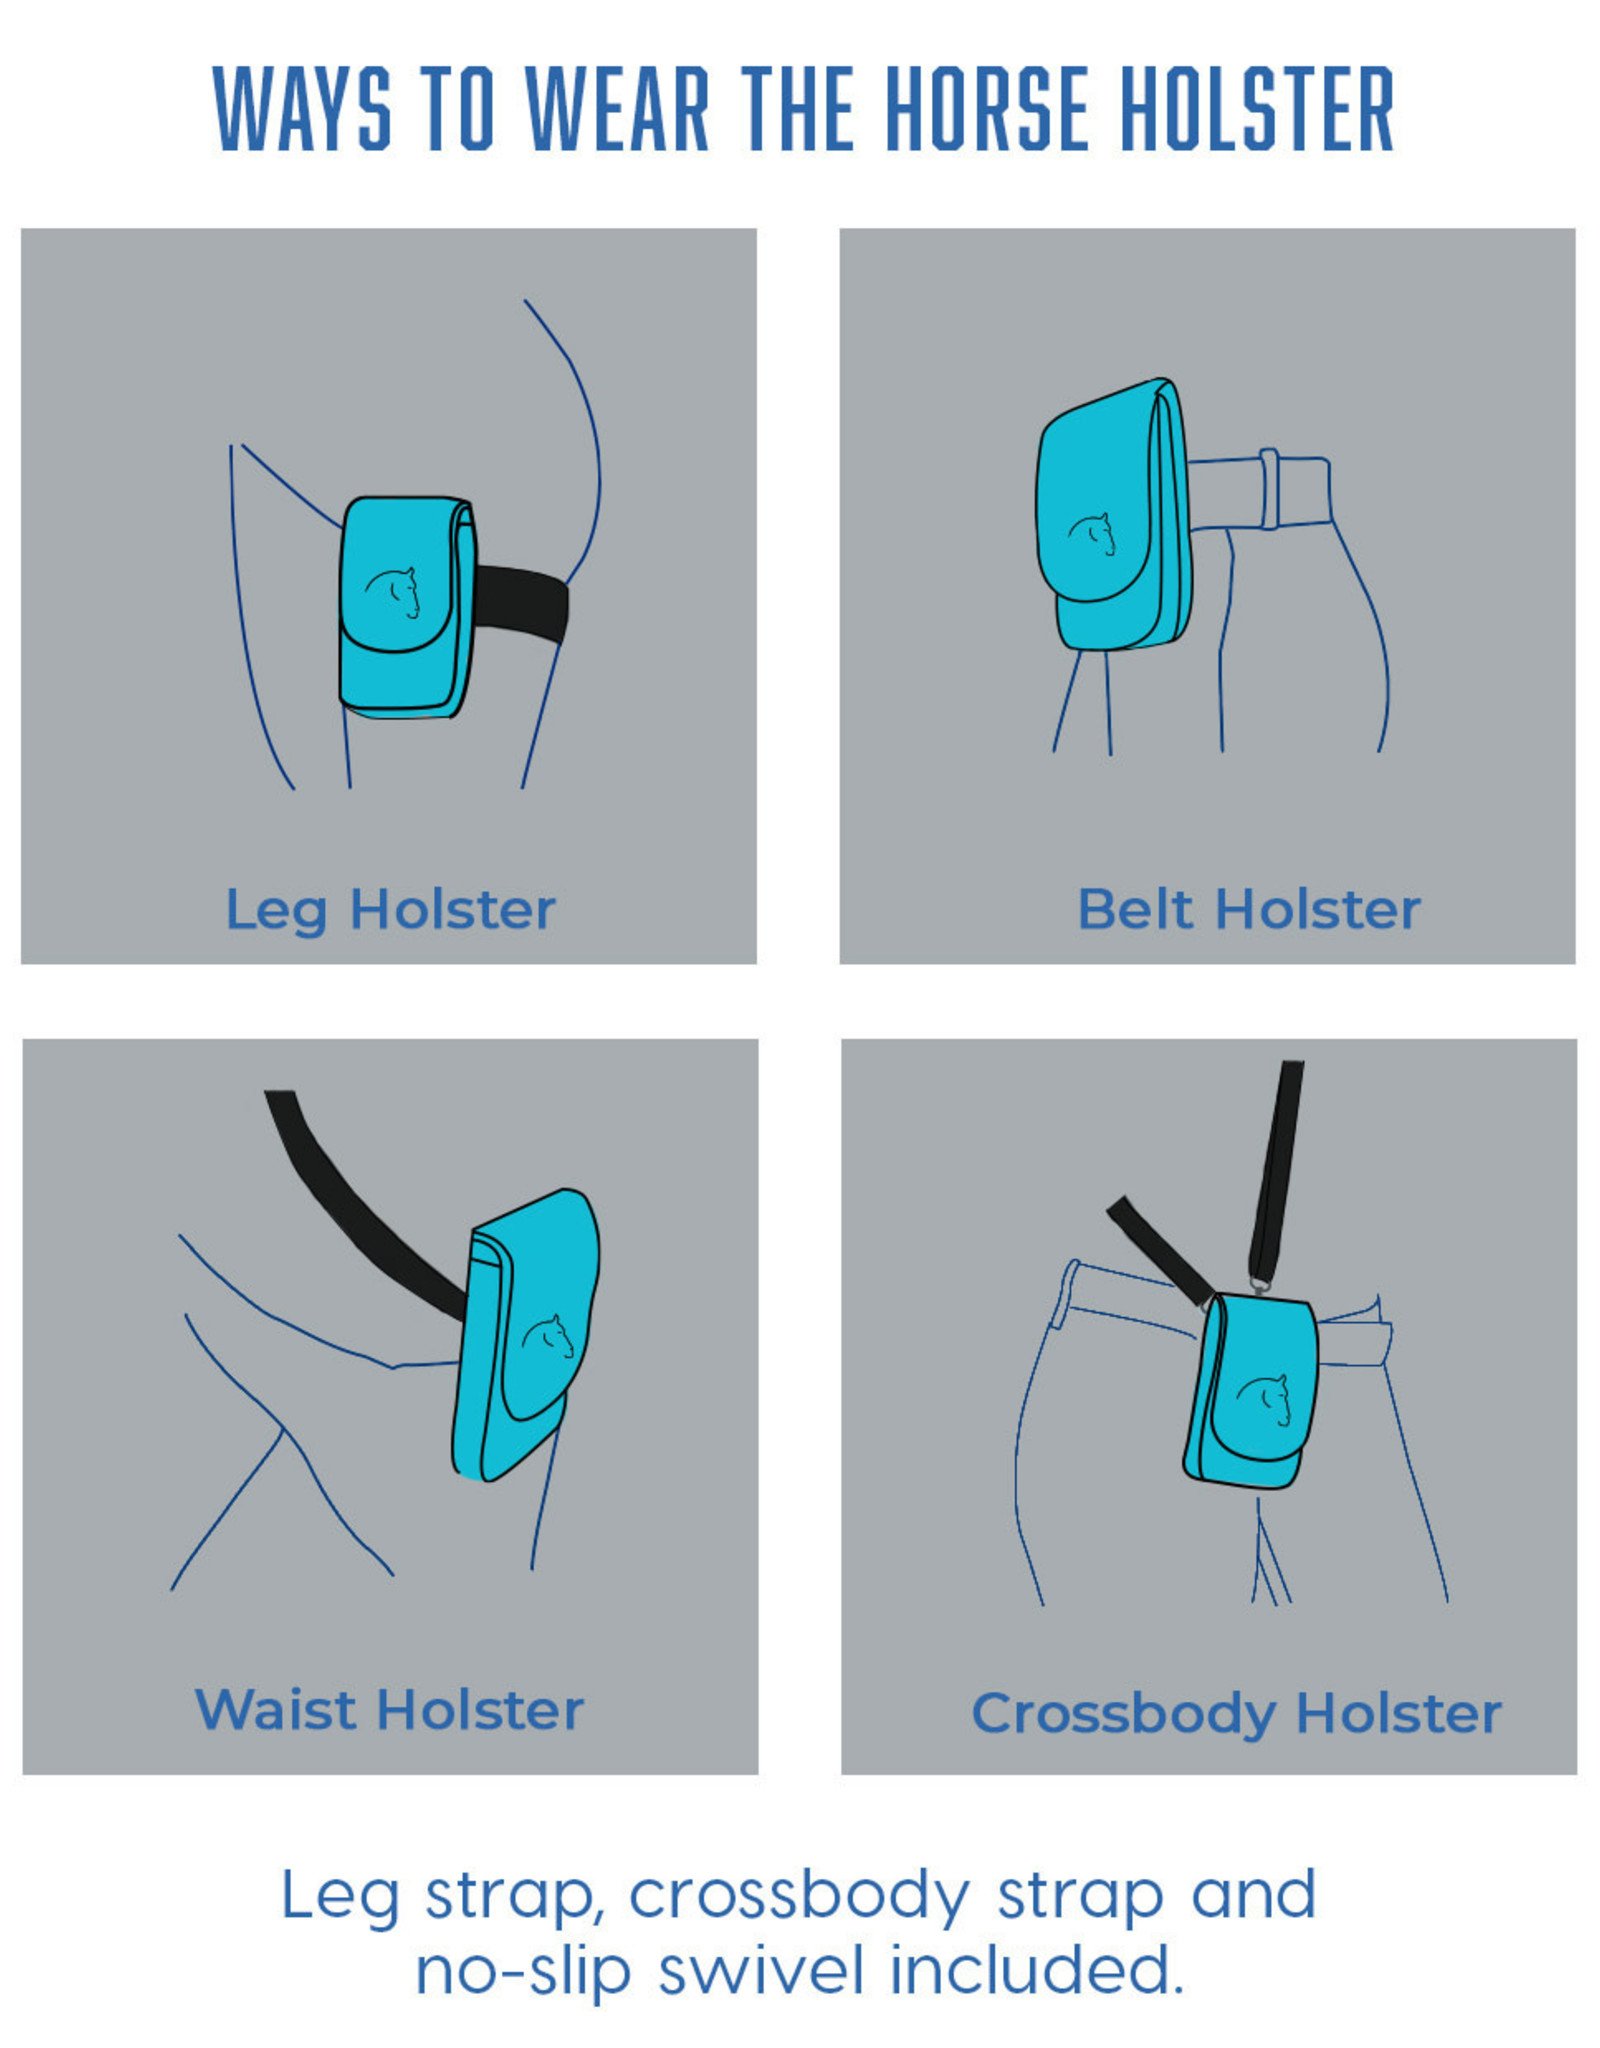 The Horse Holster